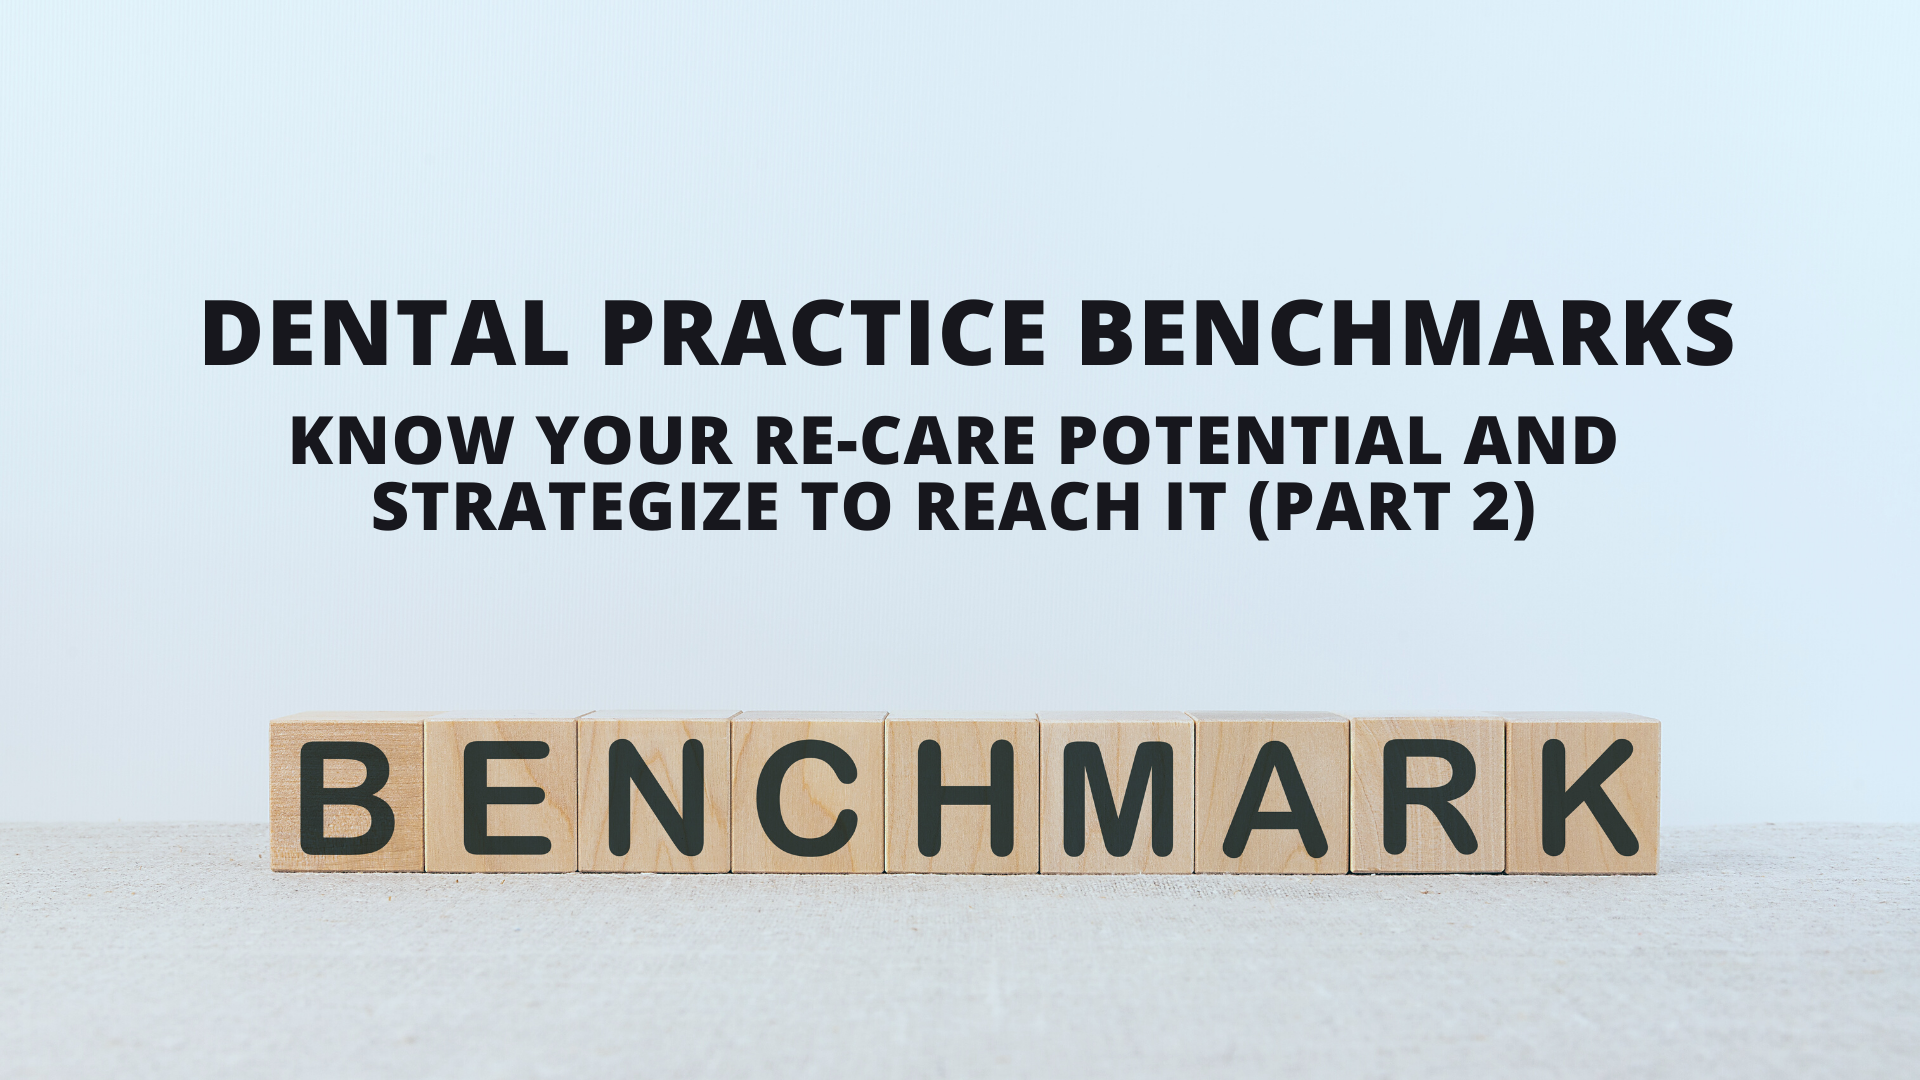 Practice Benchmarks: Know Your Re-care Potential and Strategize to Reach It (Part 2)